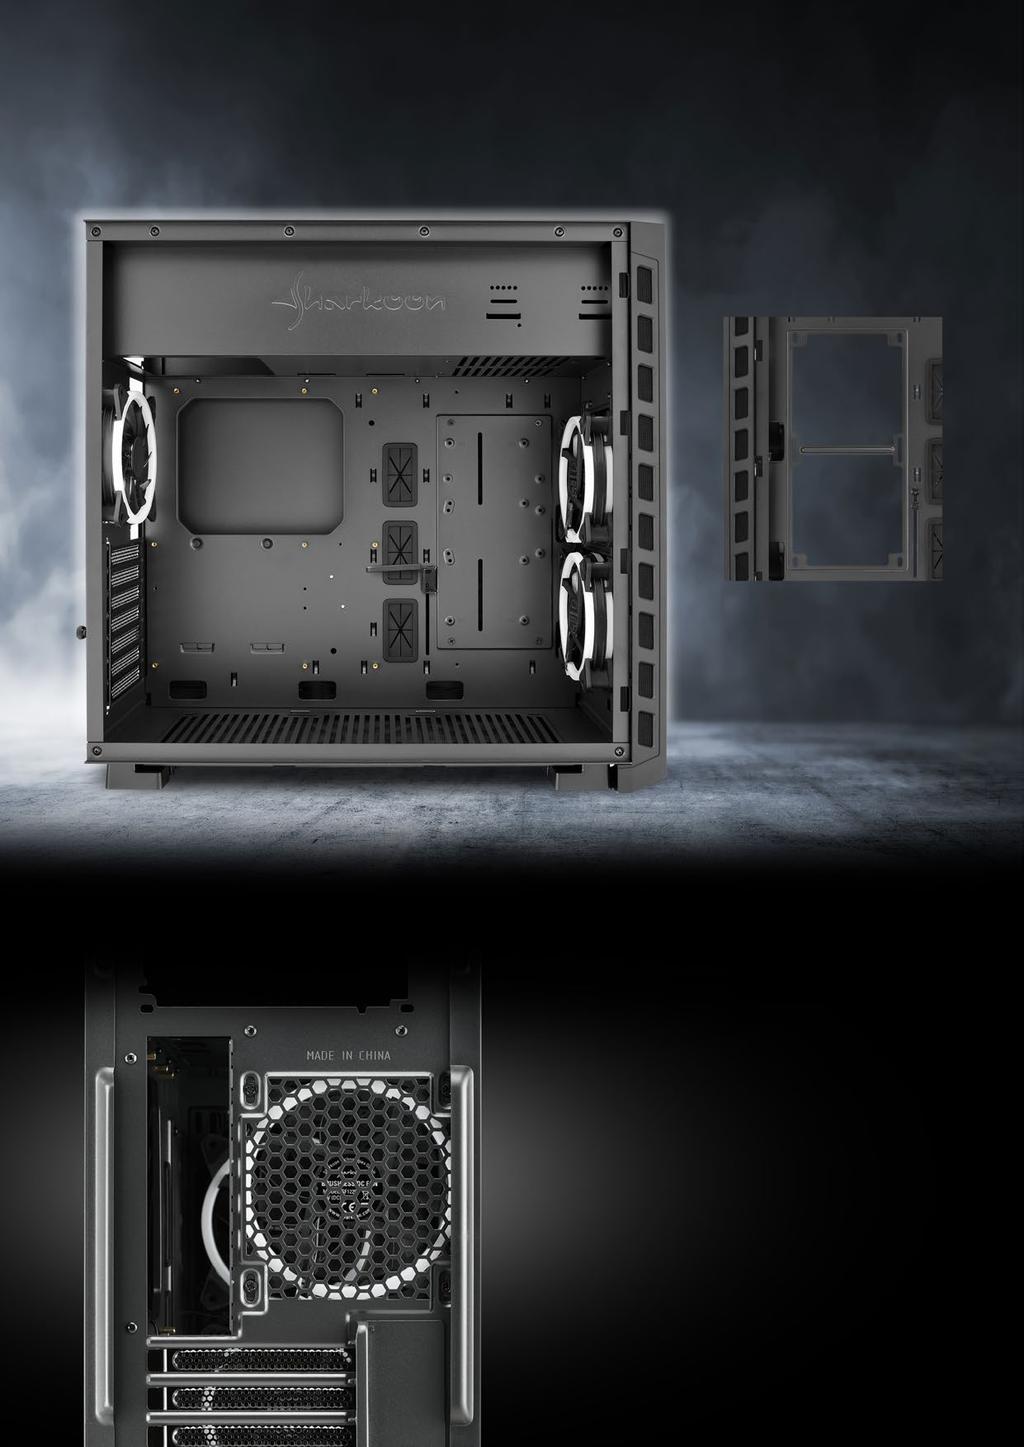 Diverse Airflow Setups Side Panel If the HDD/SDD mounting cover is removed, up to two 120 mm fans or one 240 mm radiator can be installed.